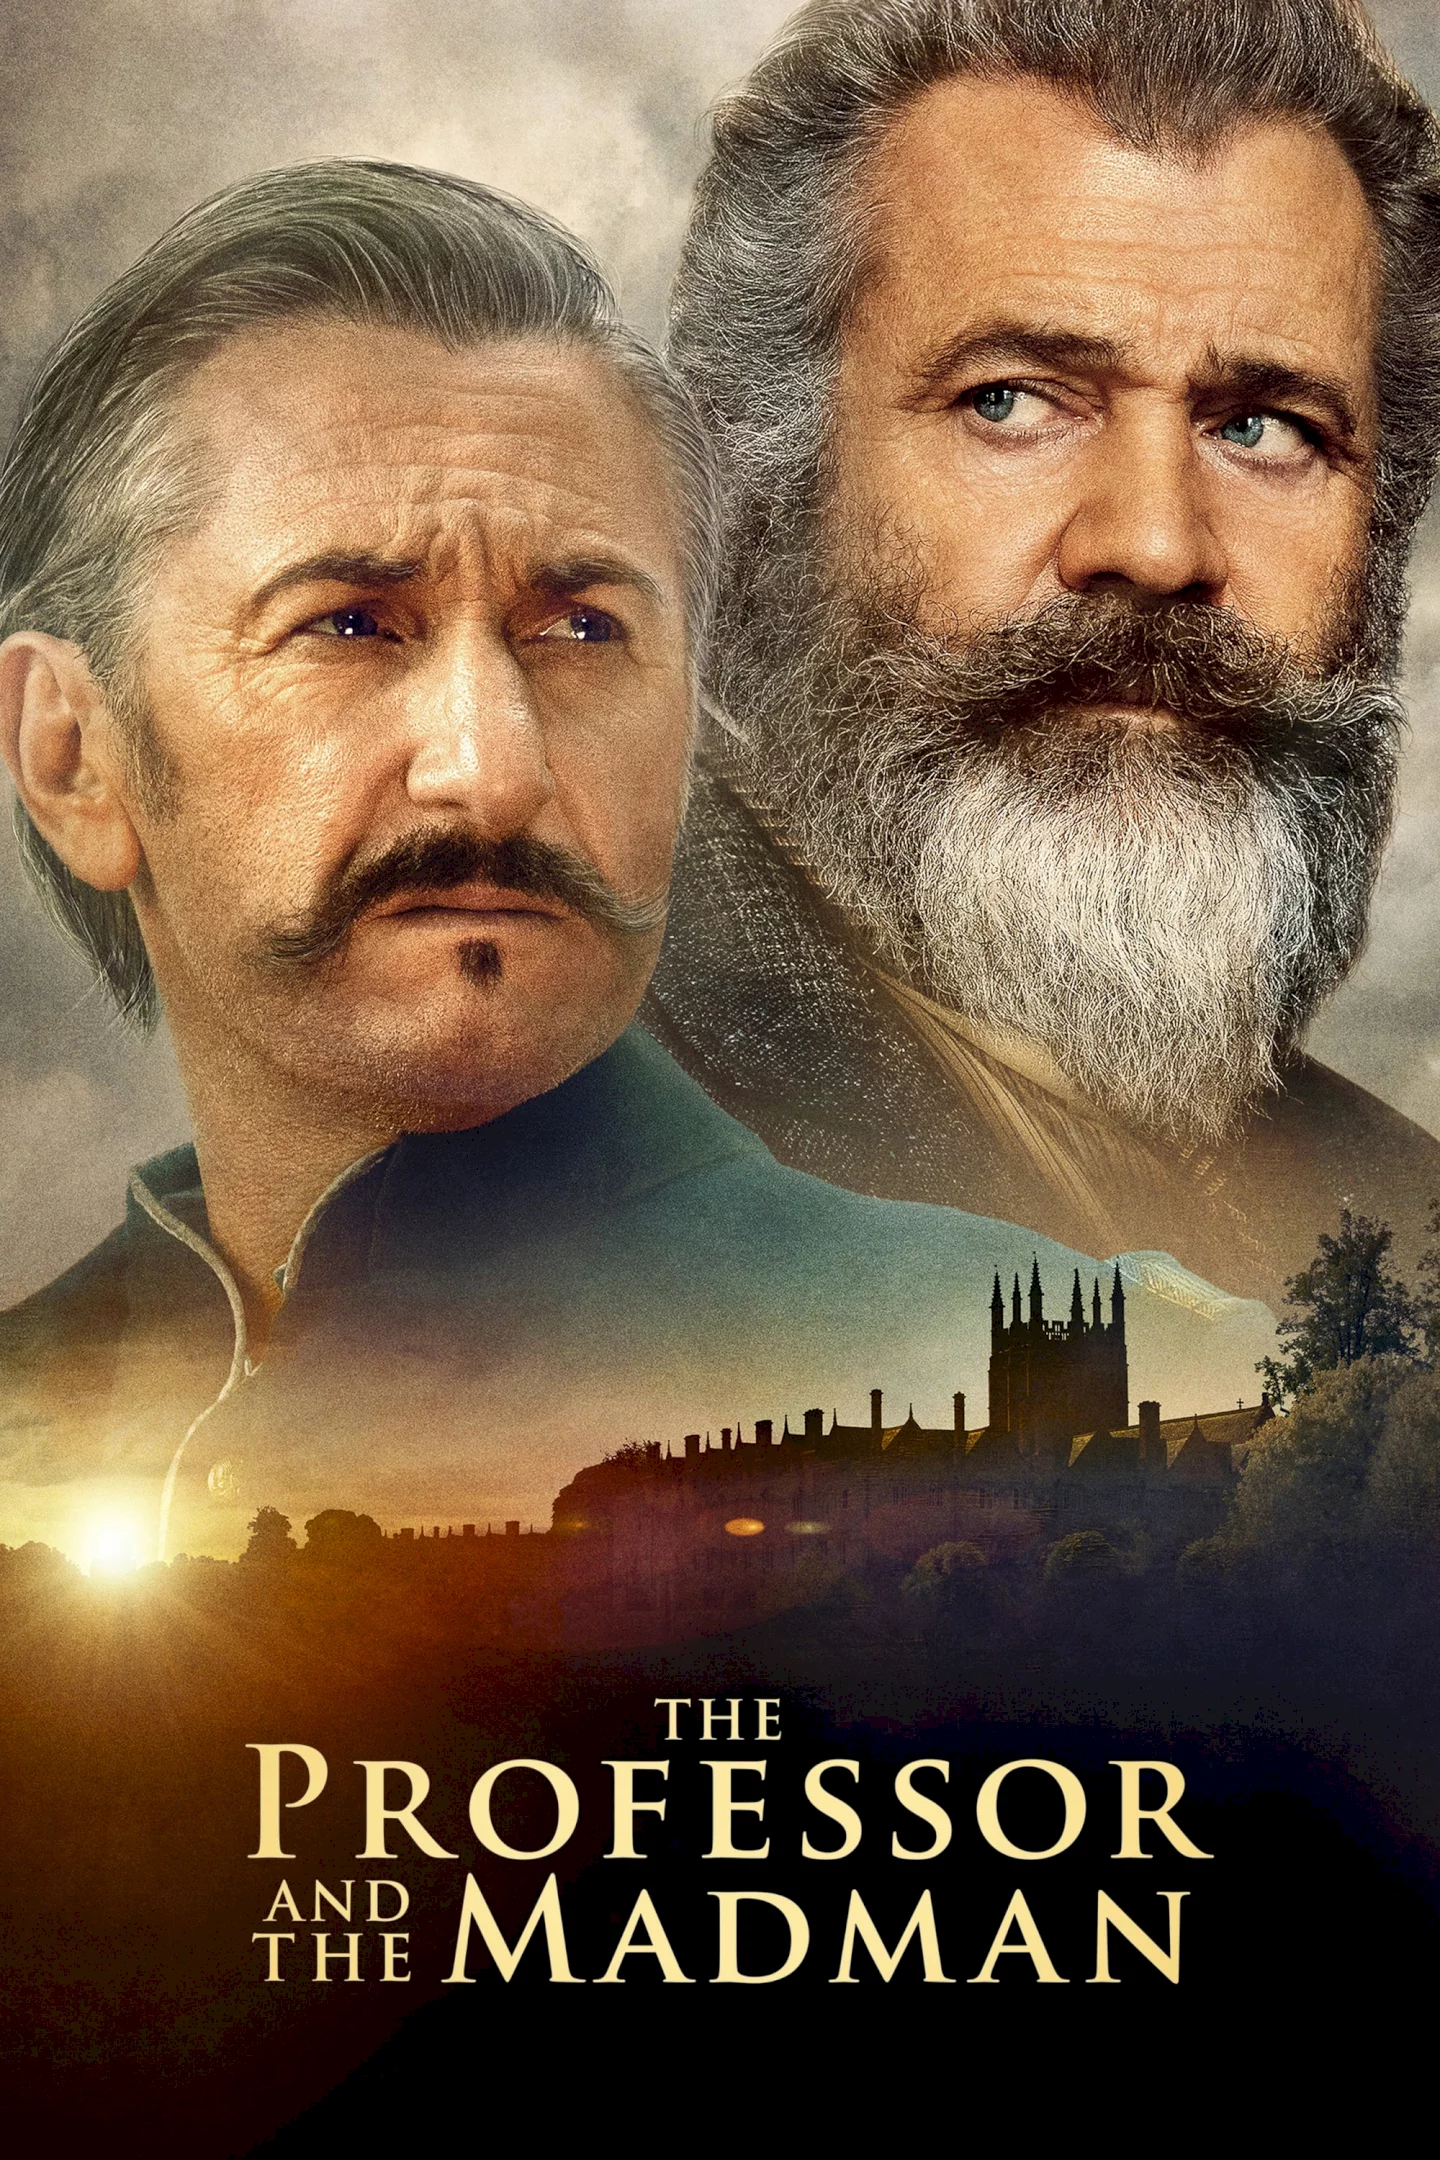 Photo 3 du film : The professor and the madman